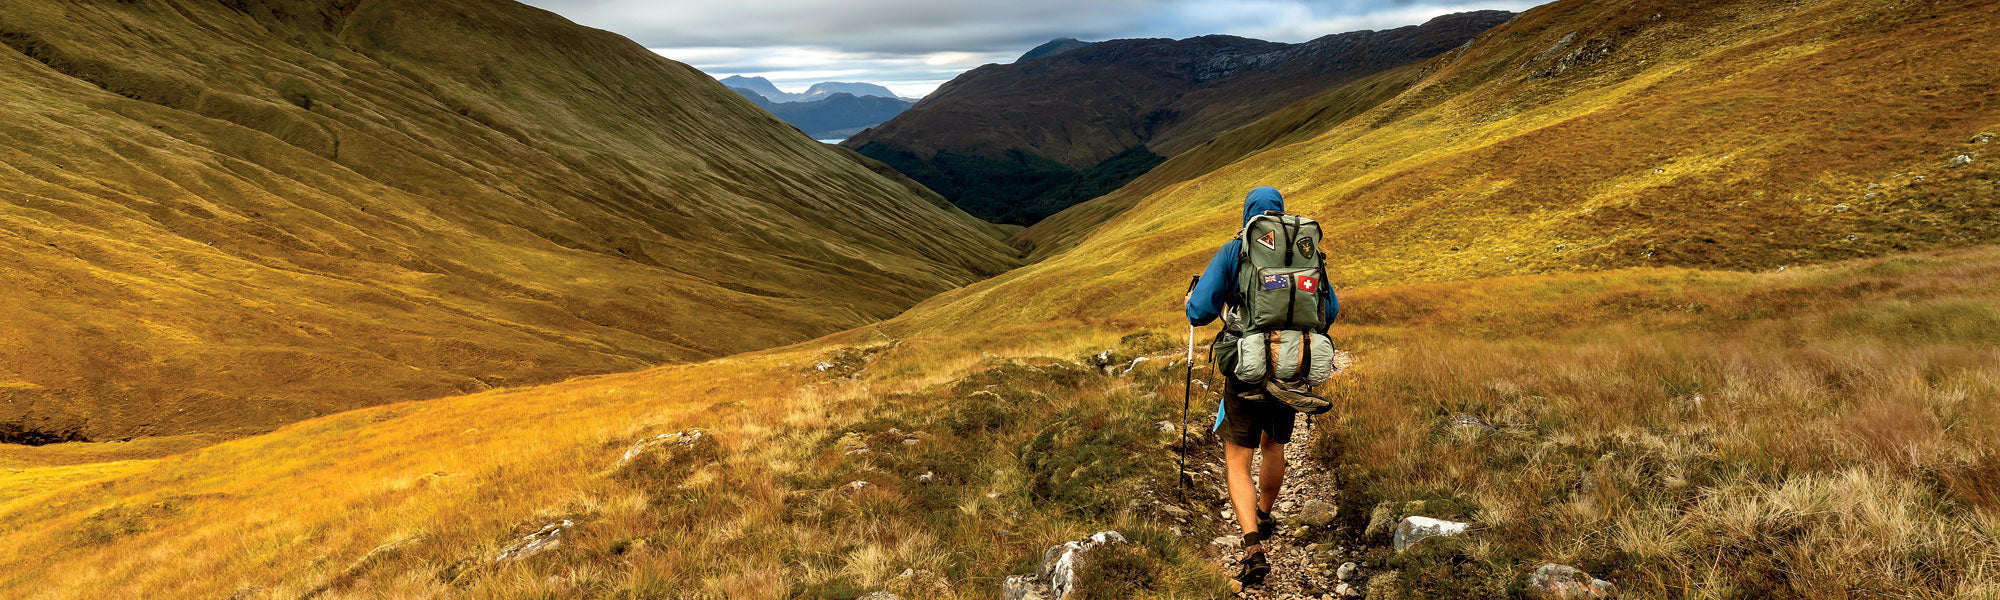 Cover image from Big Trails Great Britain and Ireland, taken on the Cape Wrath Trail, photo by Sandro Koster